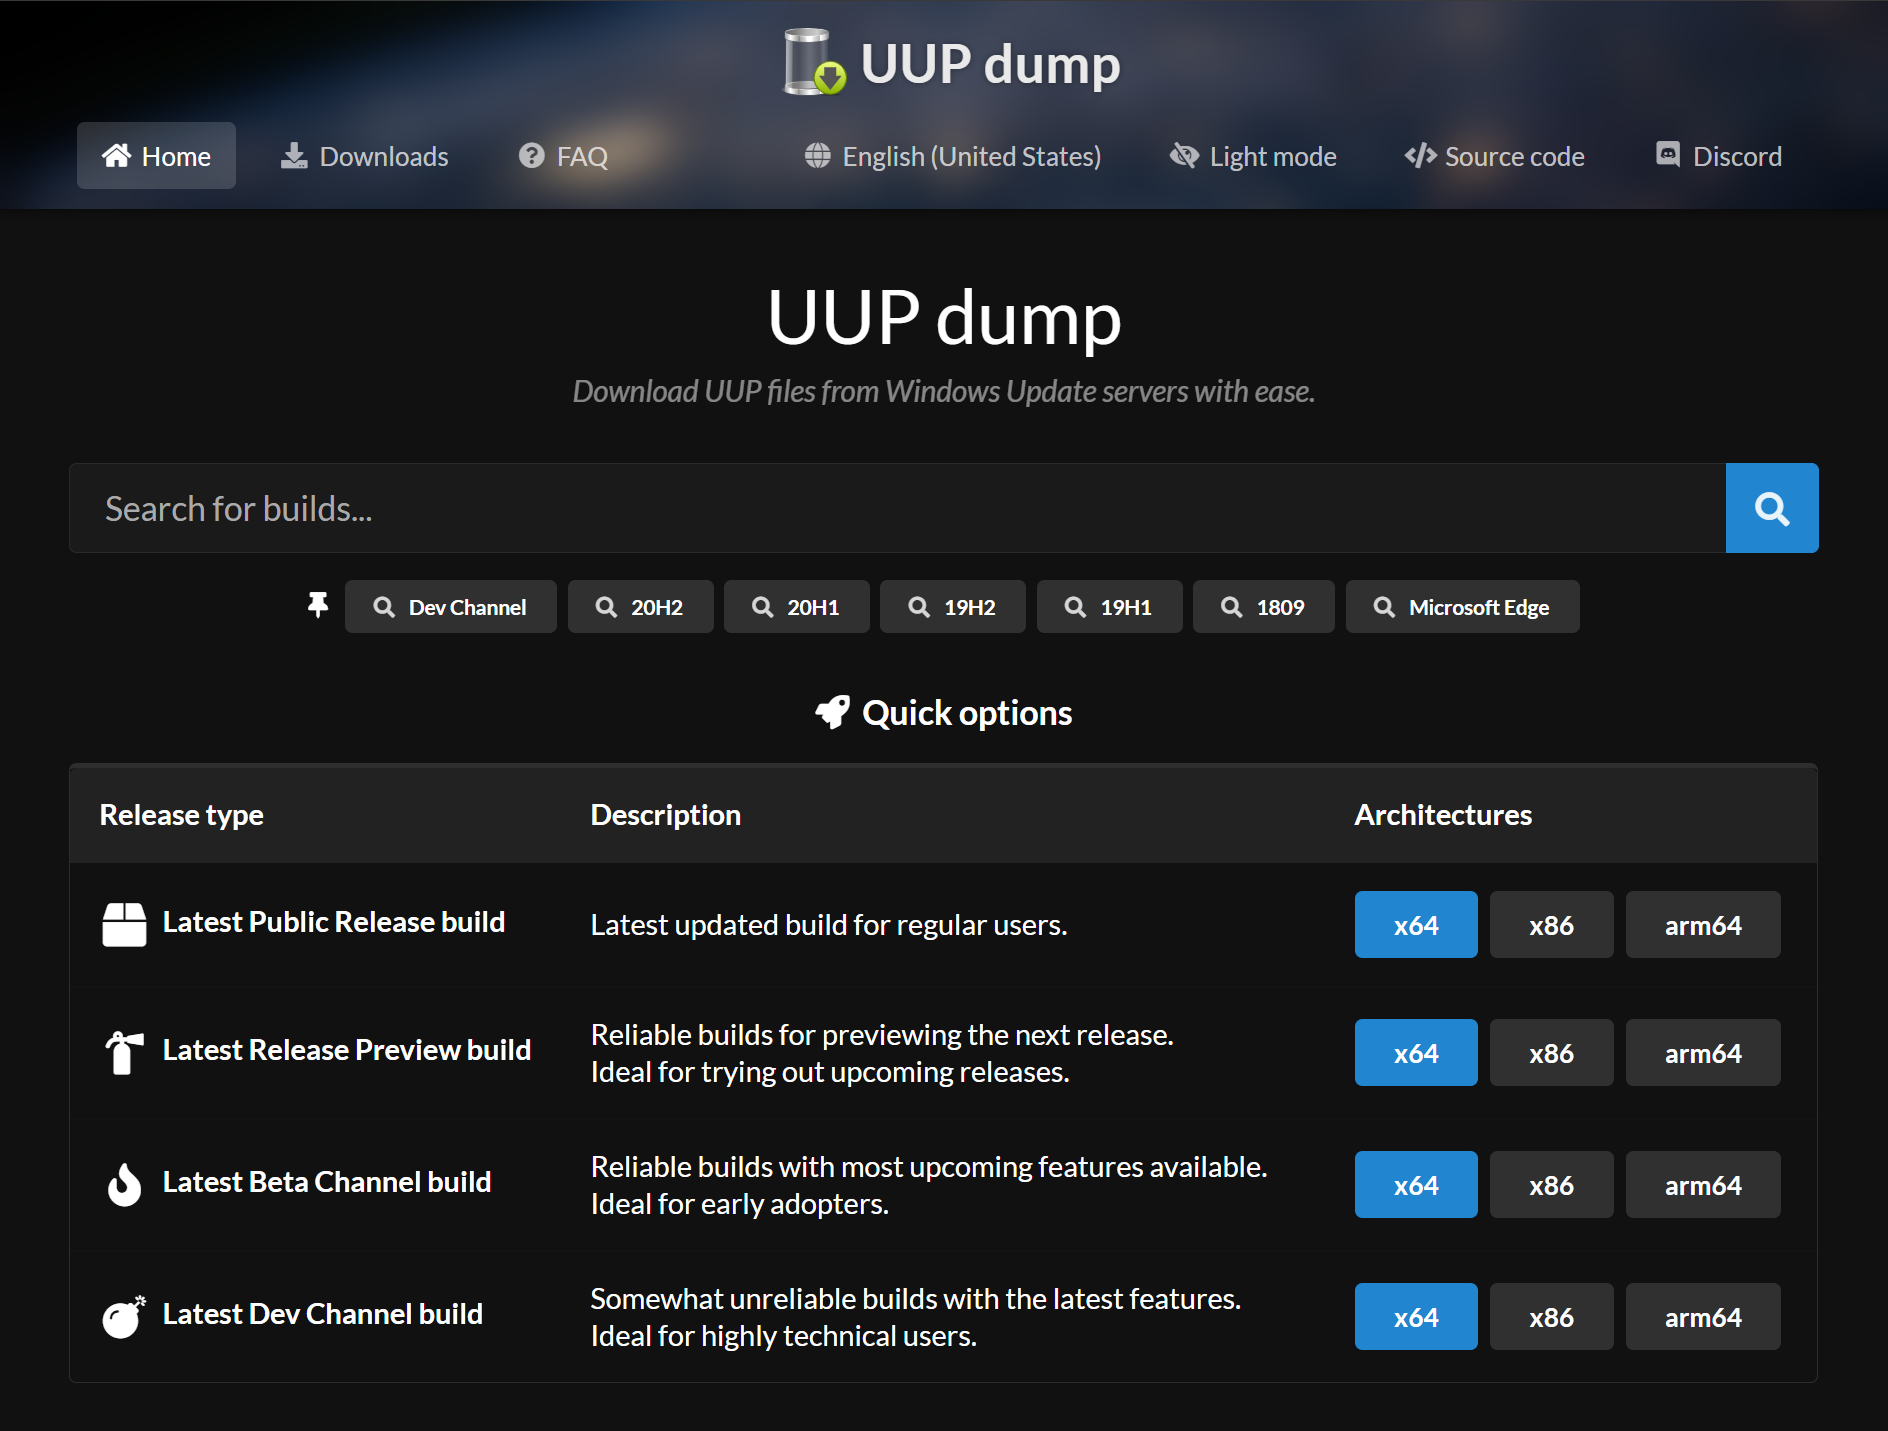 The UUPdump website Welcome Page